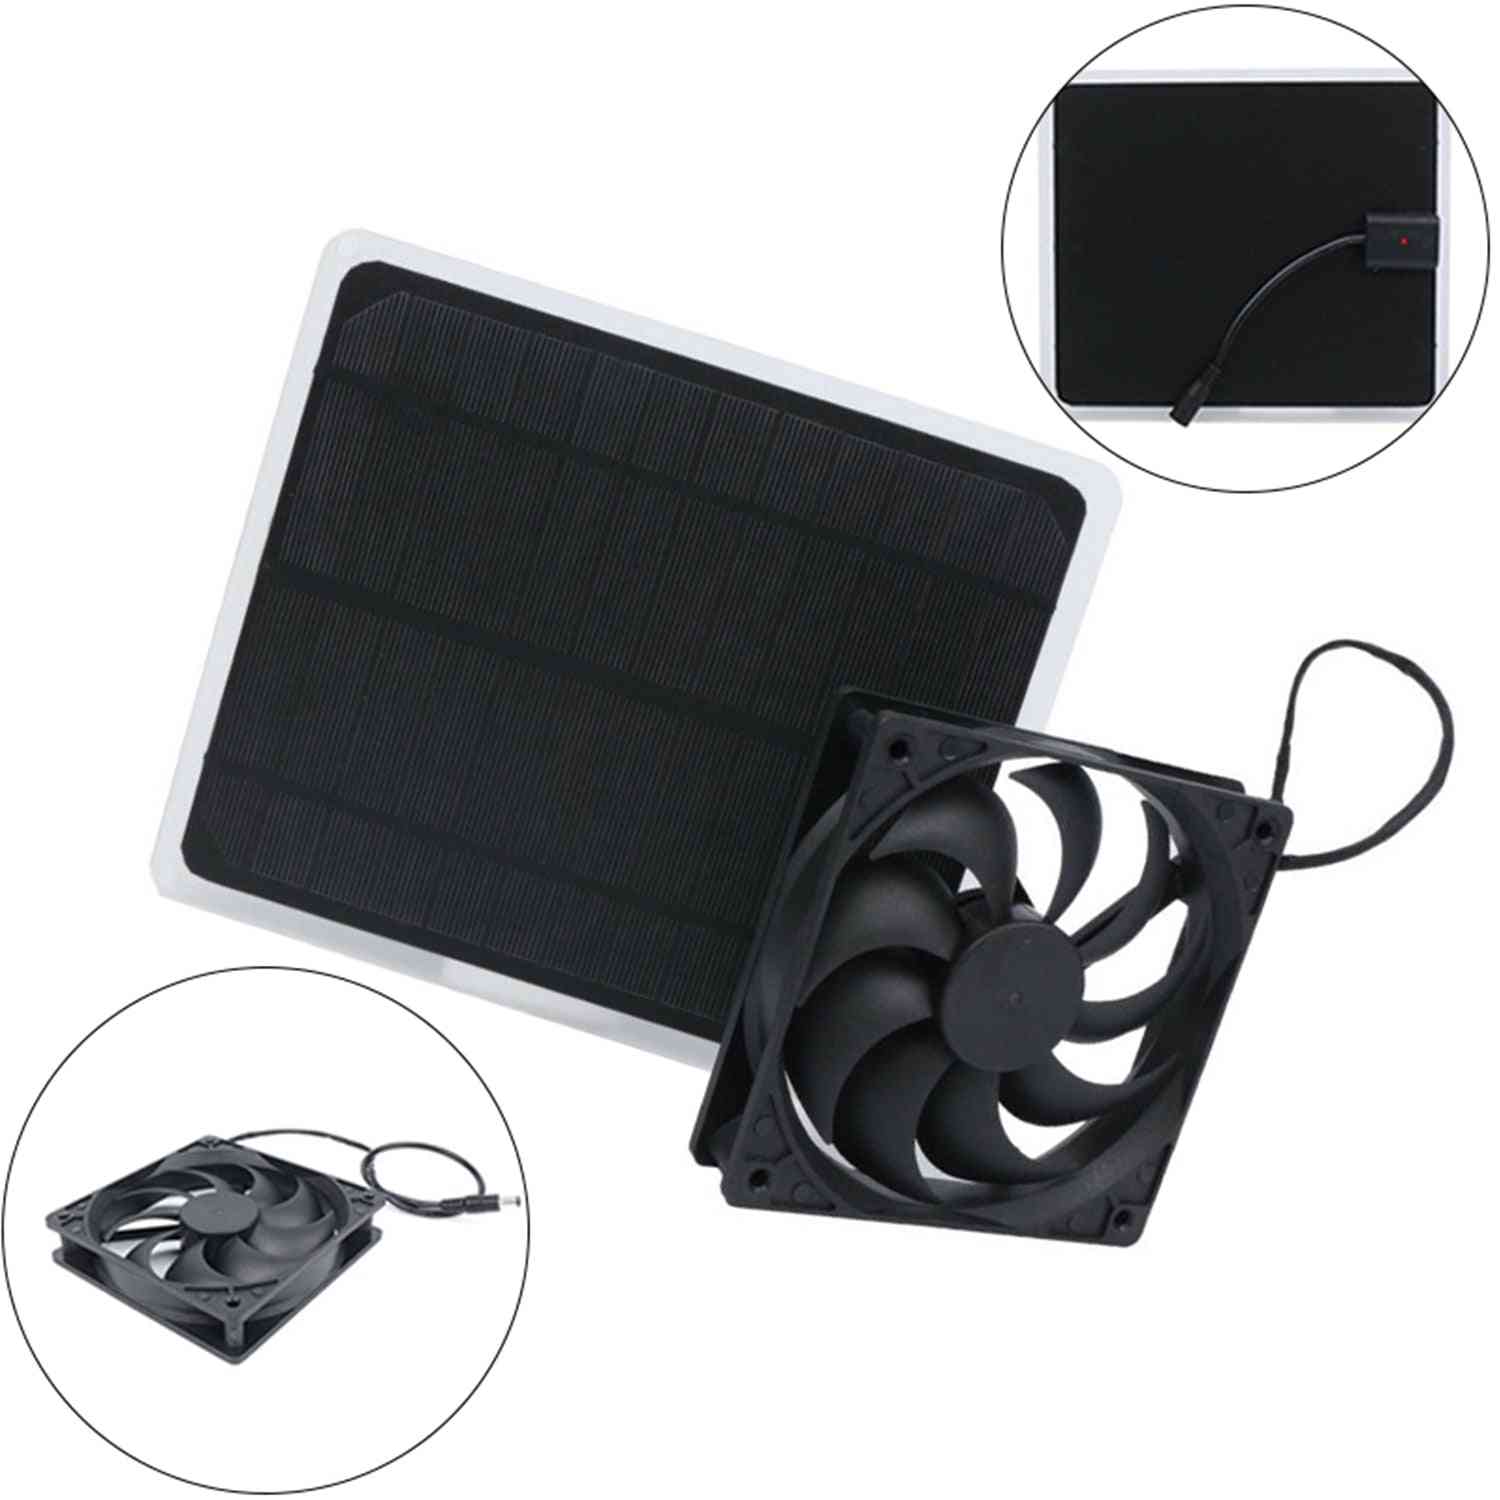 Solar Powered Panel And Fan For Home, Office, Outdoor, Traveling